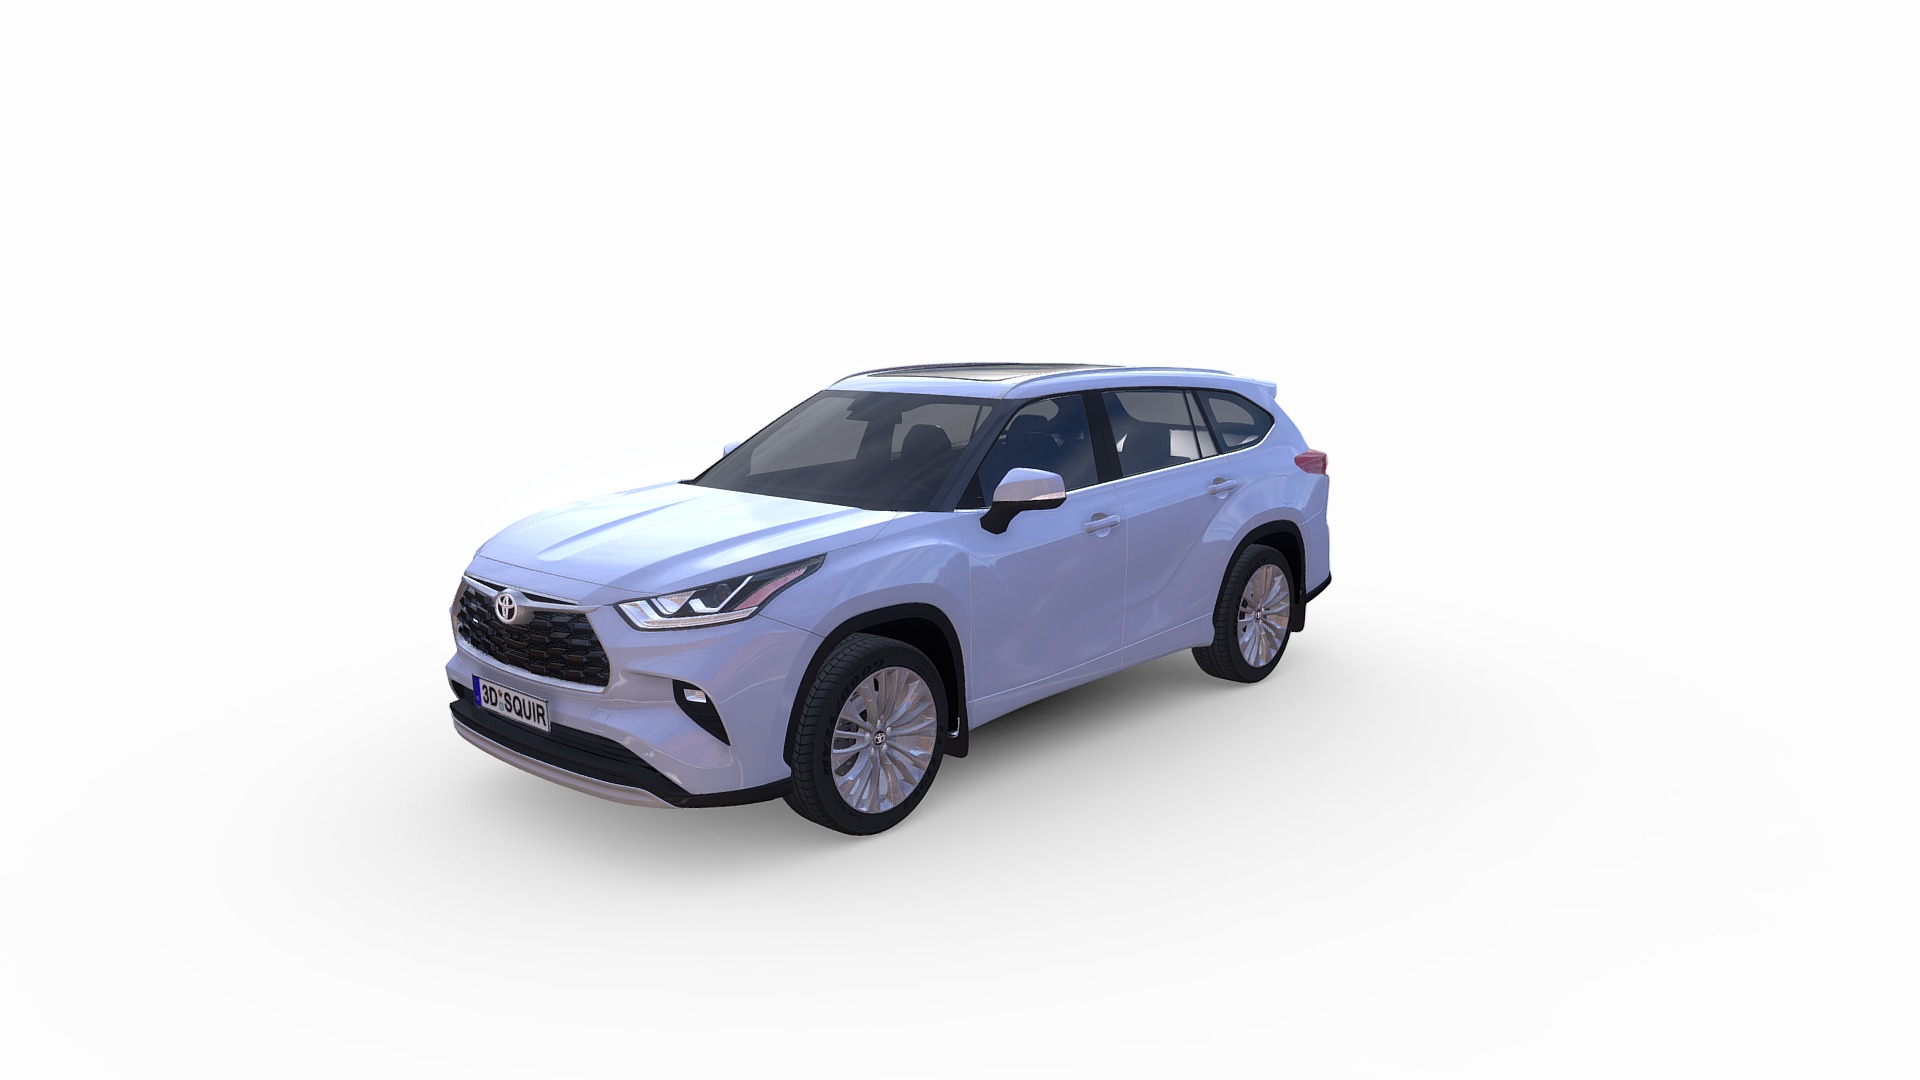 3D model Toyota Highlander 2020 - This is a 3D model of the Toyota Highlander 2020. The 3D model is about a white car with a black background.